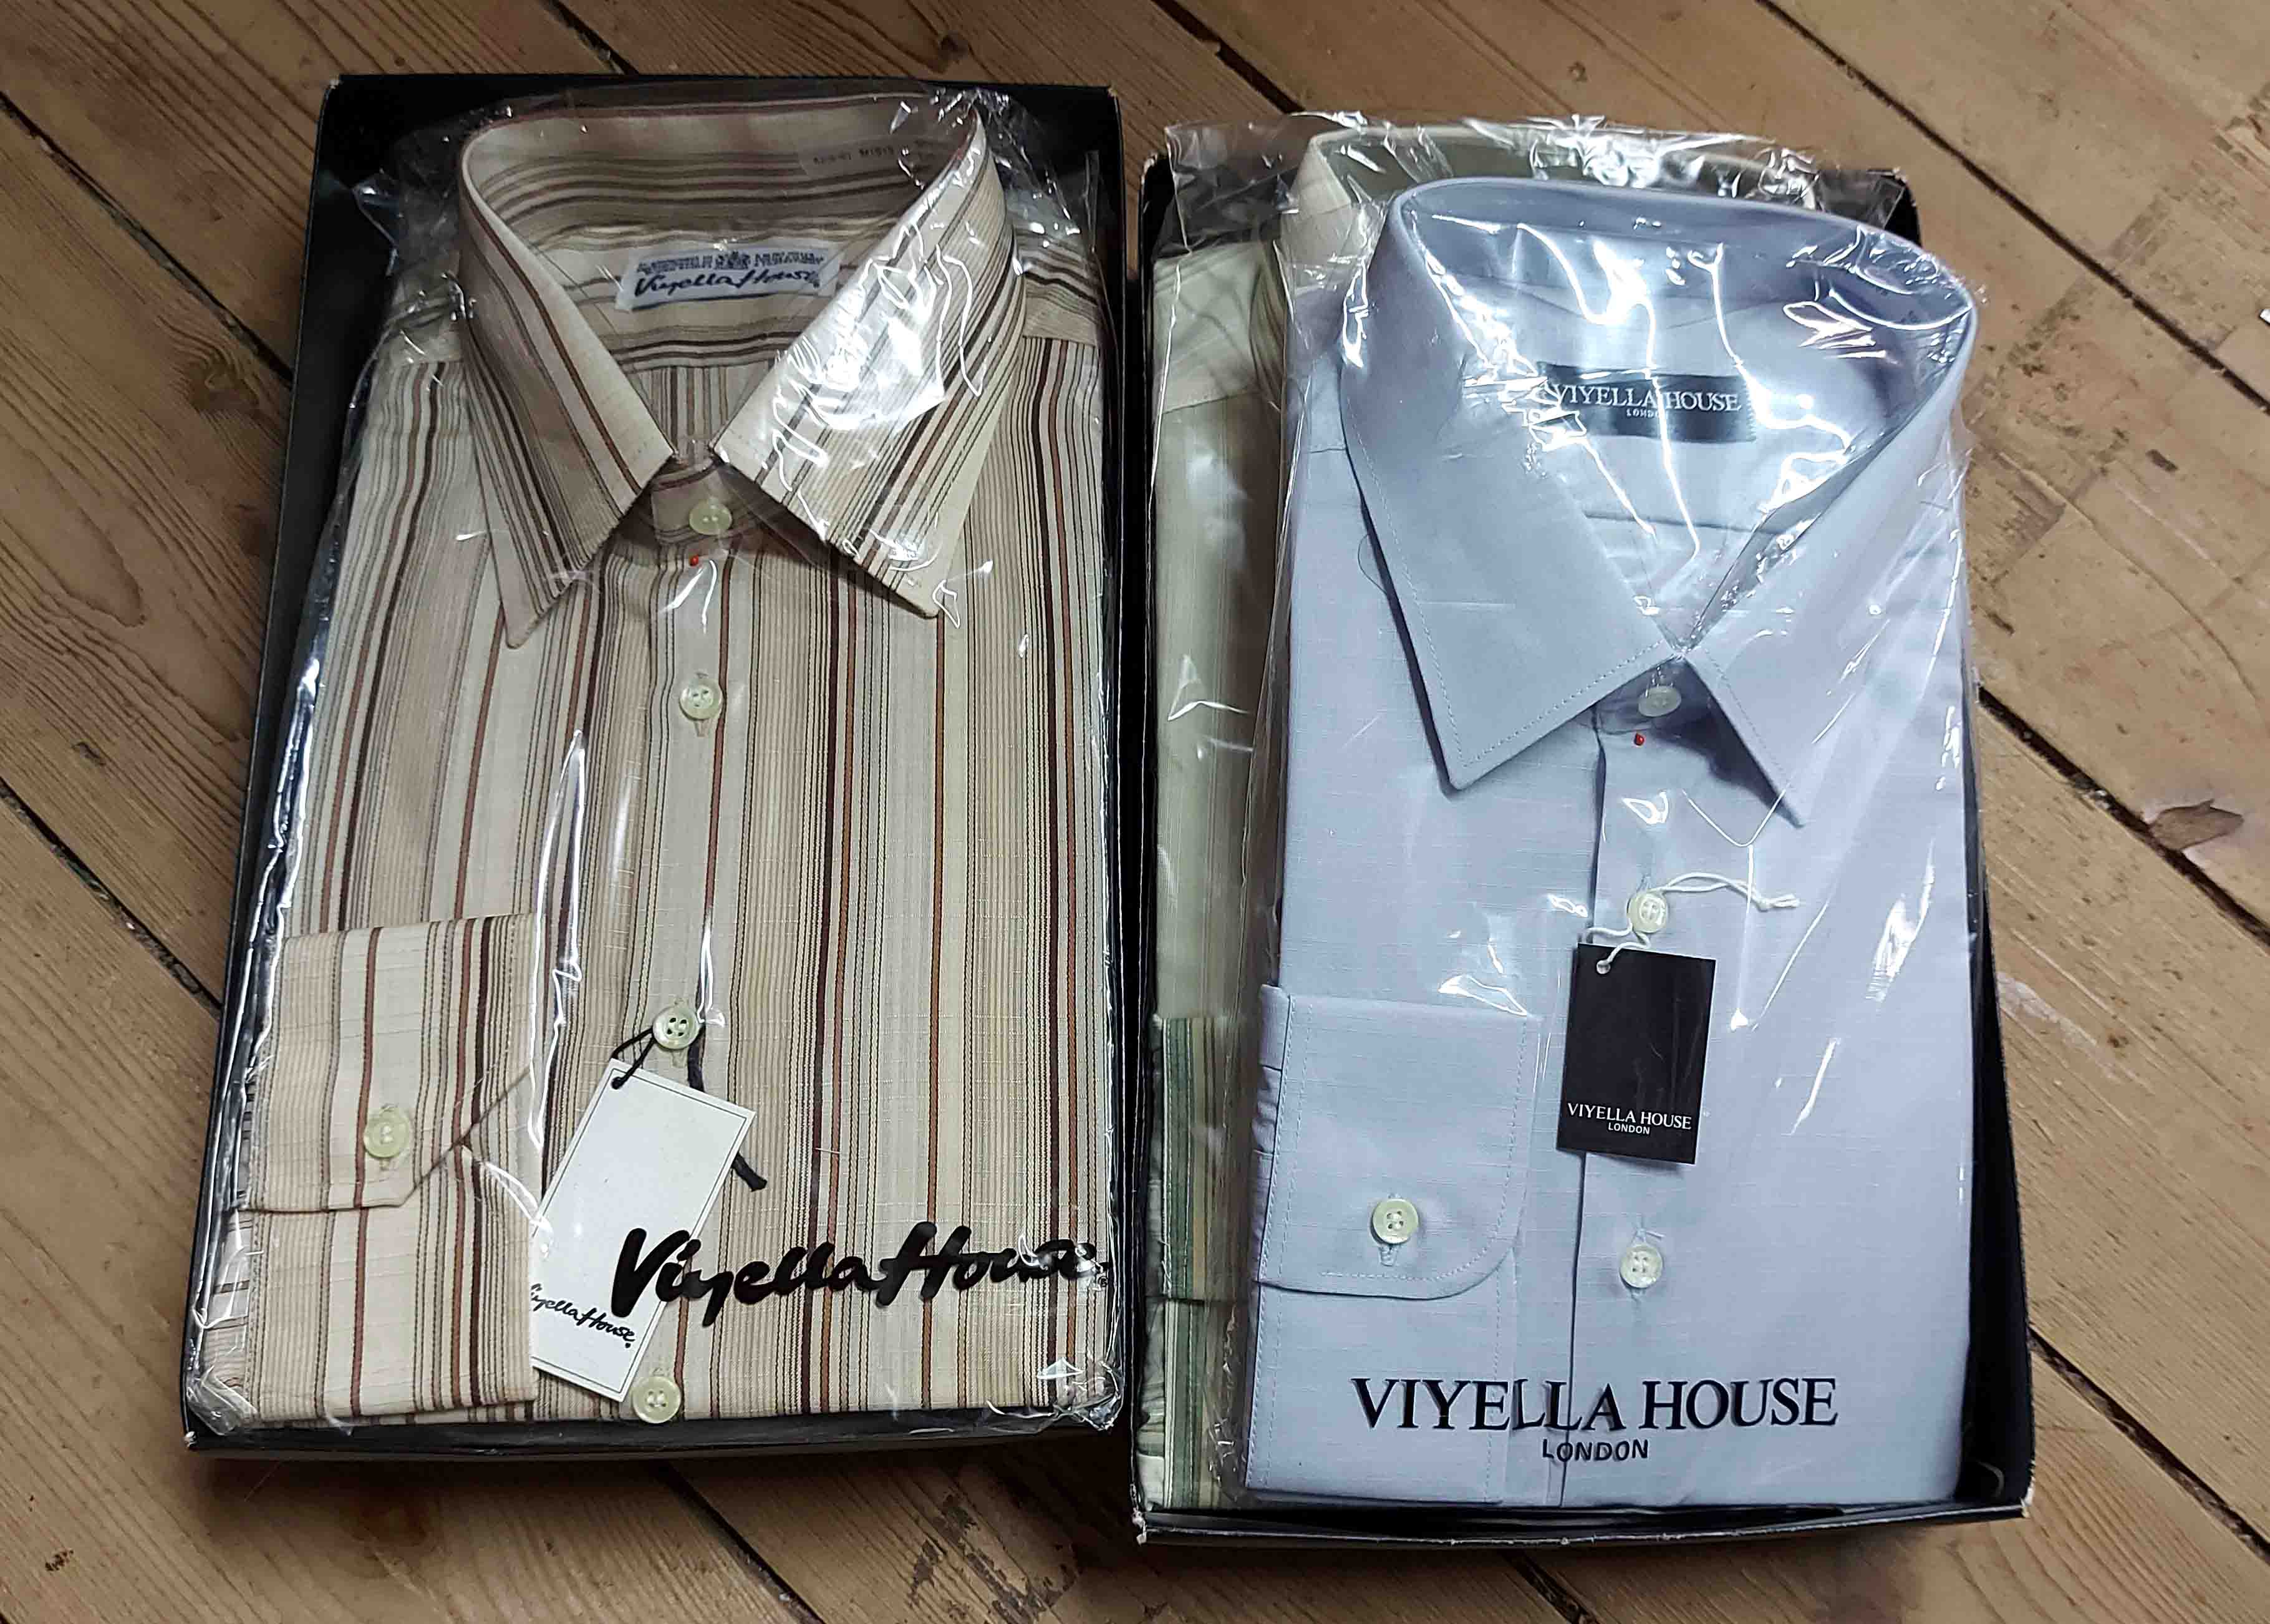 Five vintage unopened Viyella House fashion shirts, contained in two branded boxes